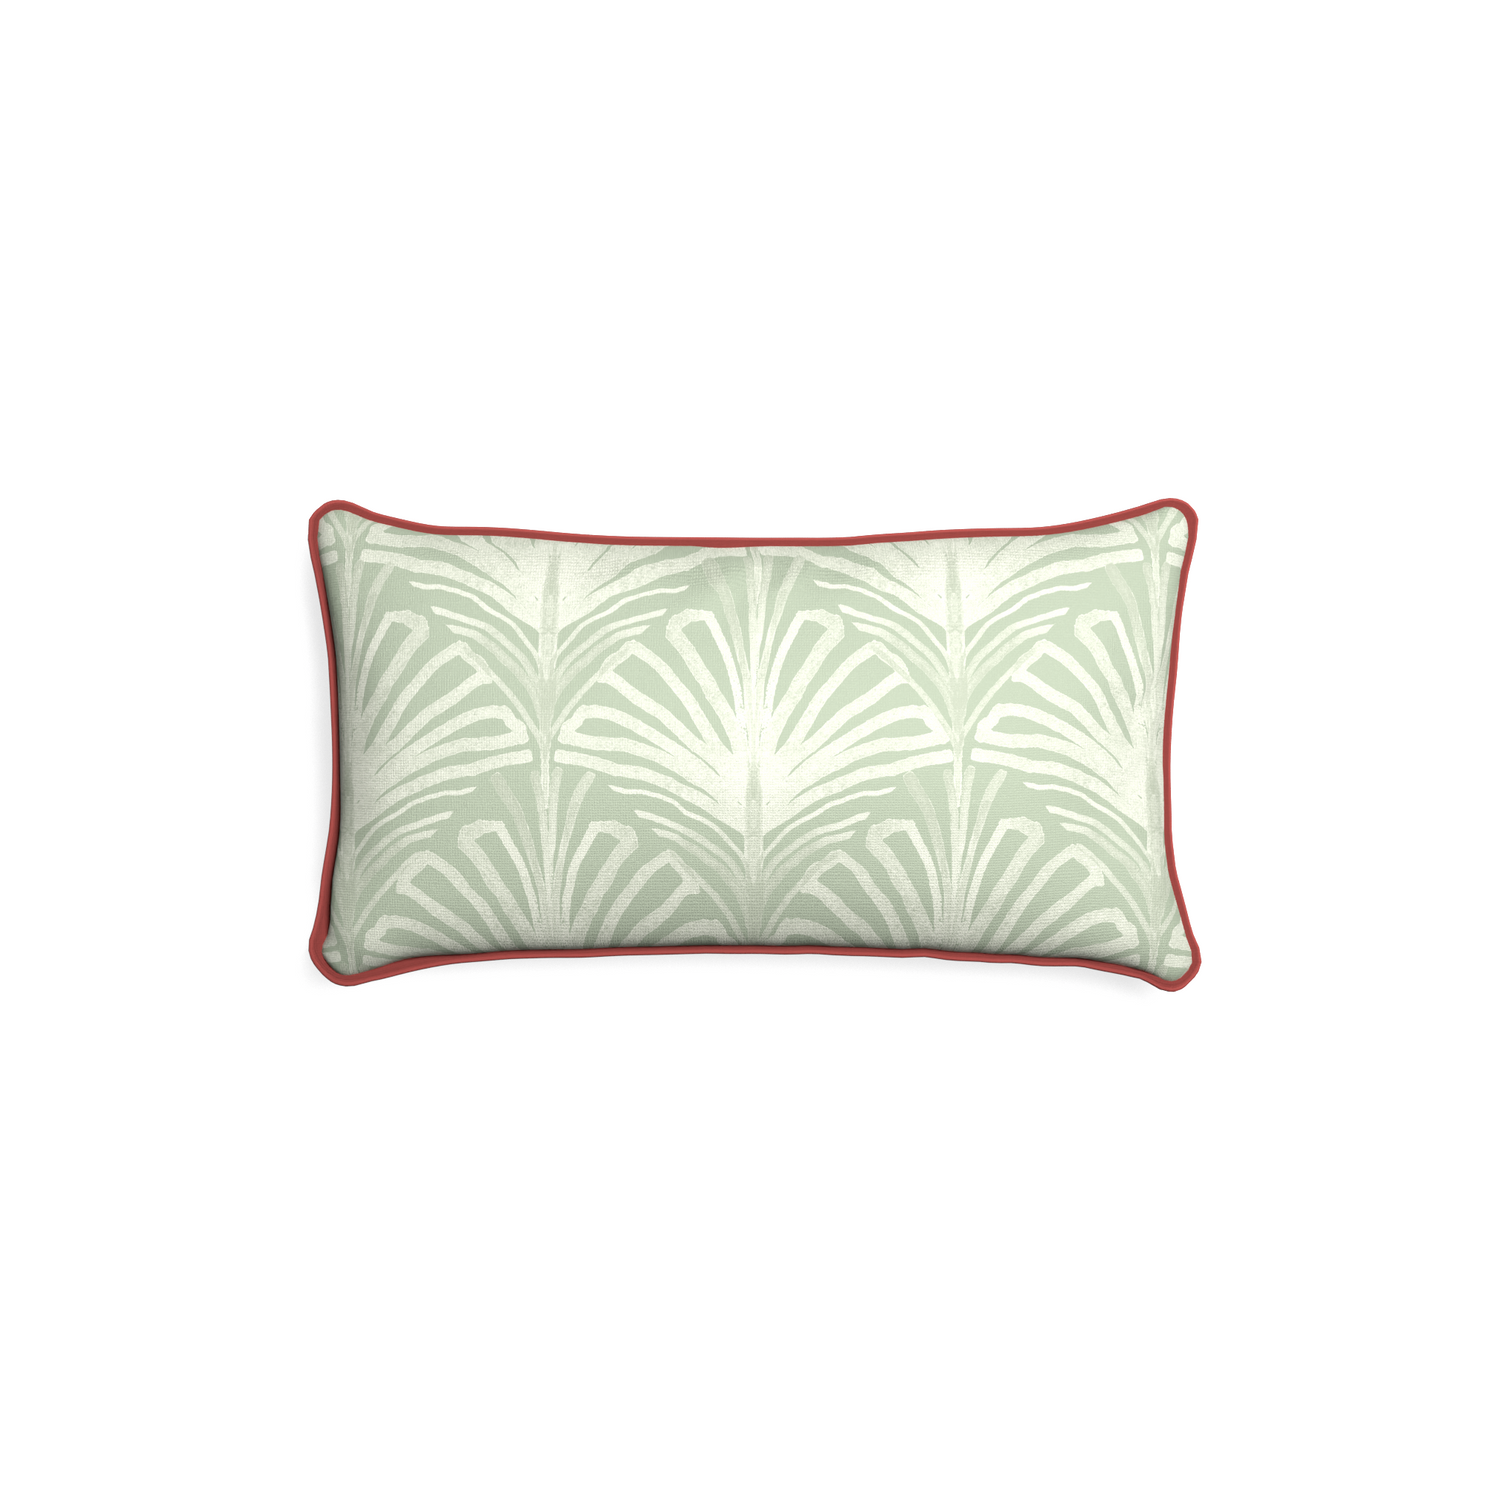 Petite-lumbar suzy sage custom sage green palmpillow with c piping on white background